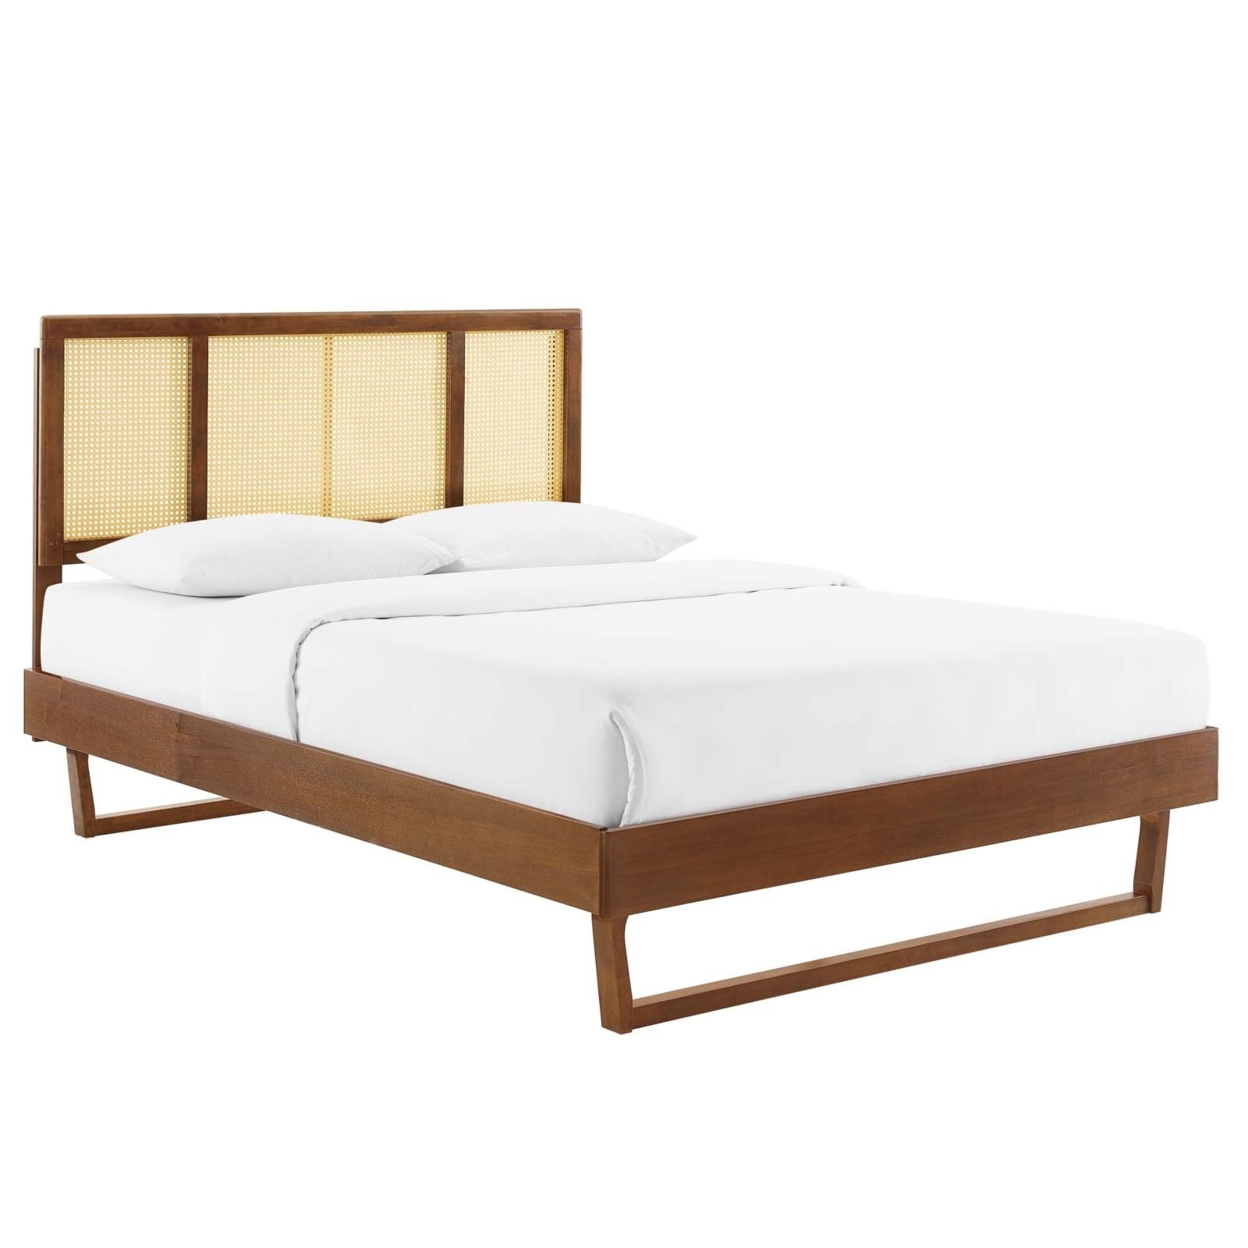 Kelsea Cane And Wood Full Platform Bed With Angular Legs, Walnut